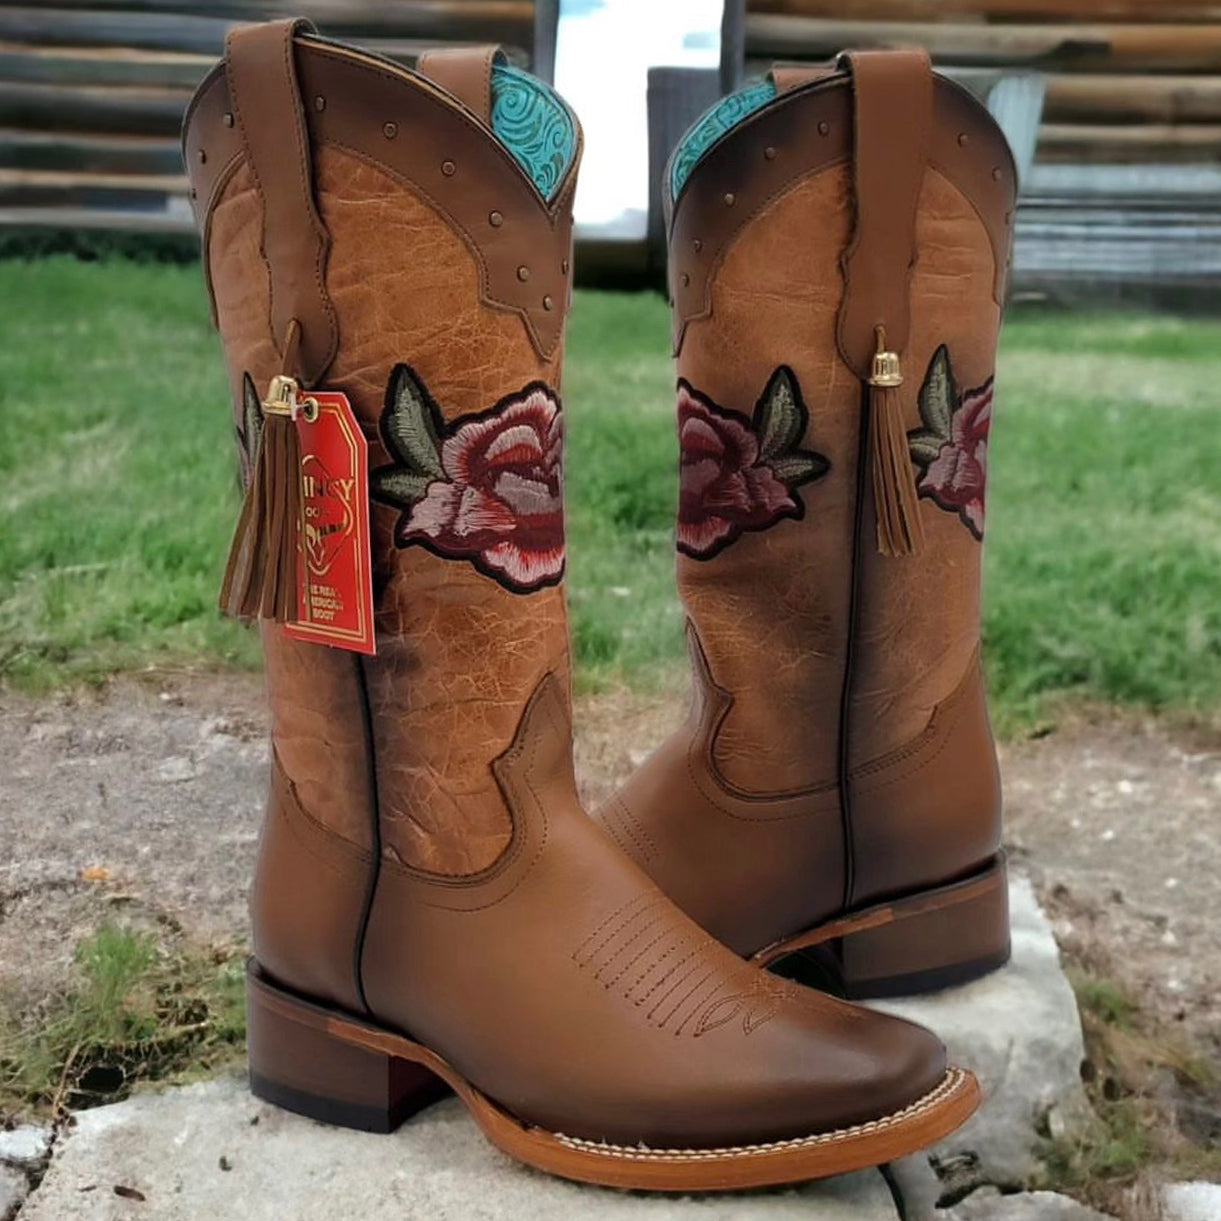 Quincy Honey Flowered Cowgirl Boots